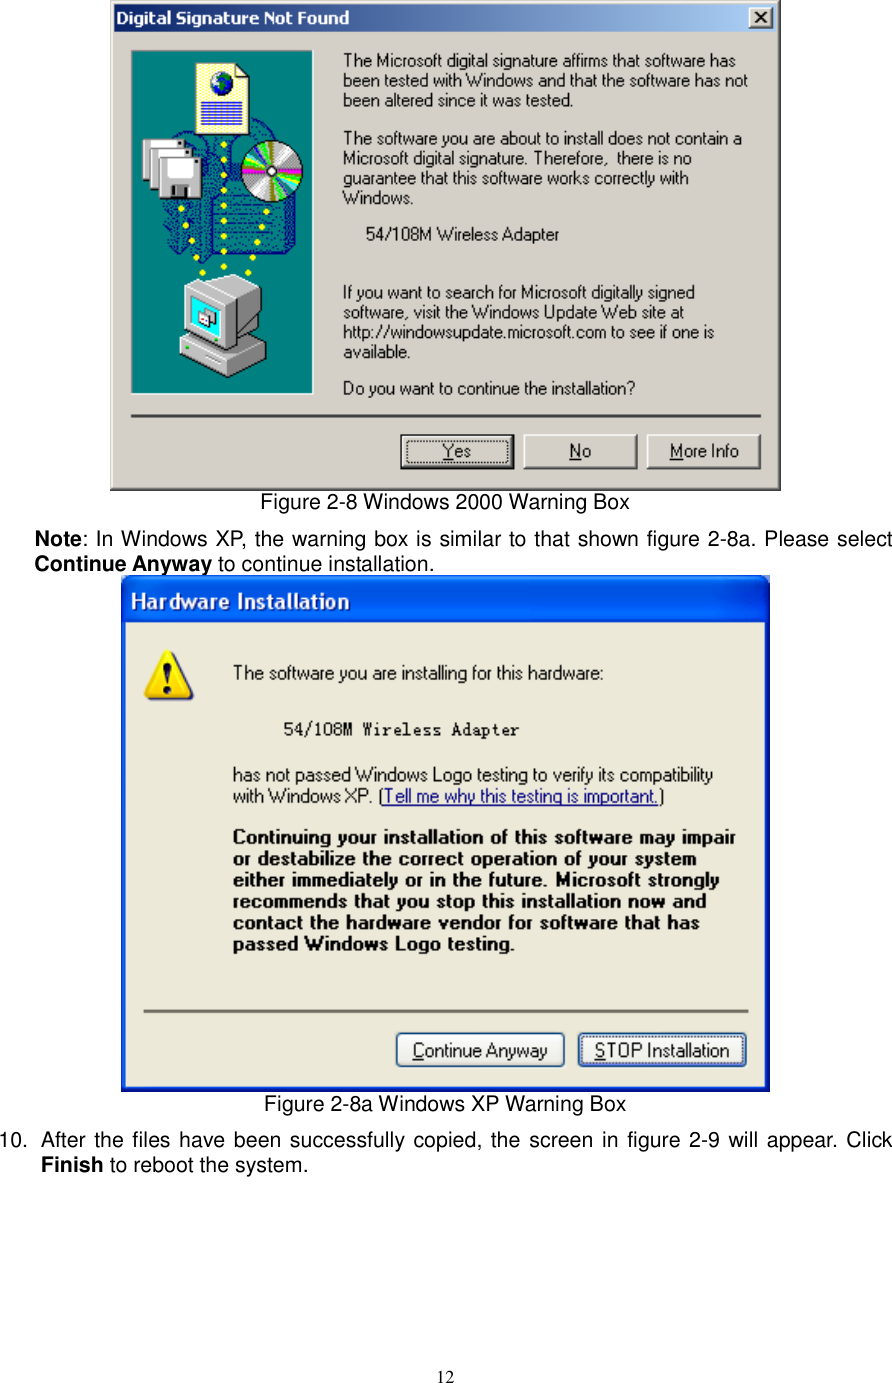  12  Figure 2-8 Windows 2000 Warning Box Note: In Windows XP, the warning box is similar to that shown figure 2-8a. Please select Continue Anyway to continue installation.  Figure 2-8a Windows XP Warning Box 10.  After the files have been successfully copied, the screen in figure 2-9 will appear. Click Finish to reboot the system. 